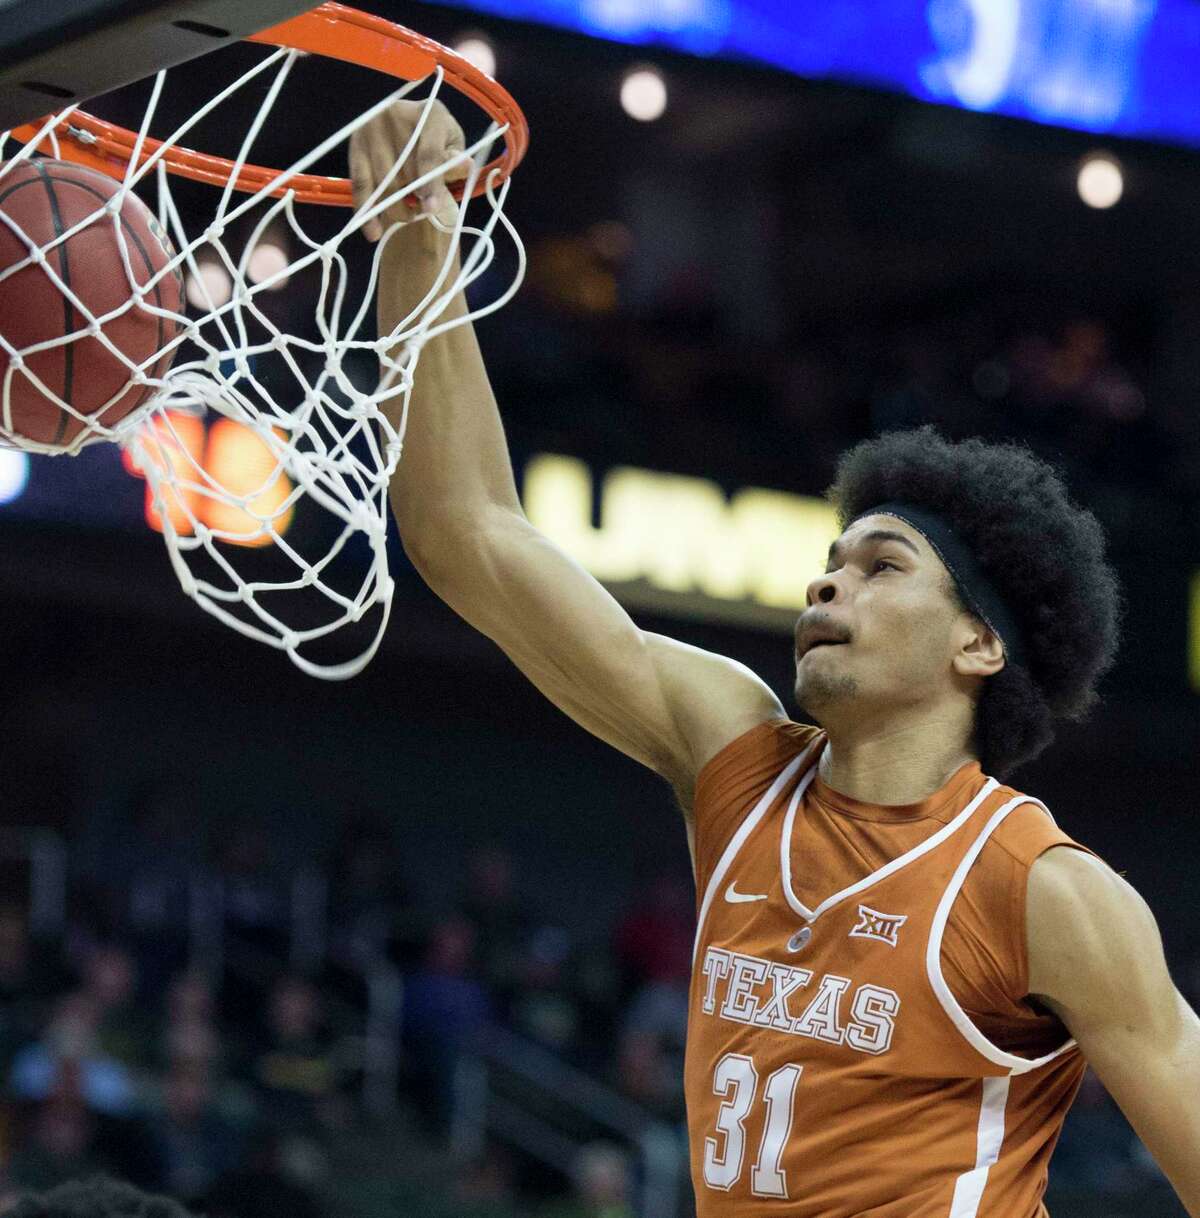 Texas' Jarrett Allen is being likened to Rockets center Clint Capela as a player who will need some time to work on his game and gain strength in order to excel in the NBA.